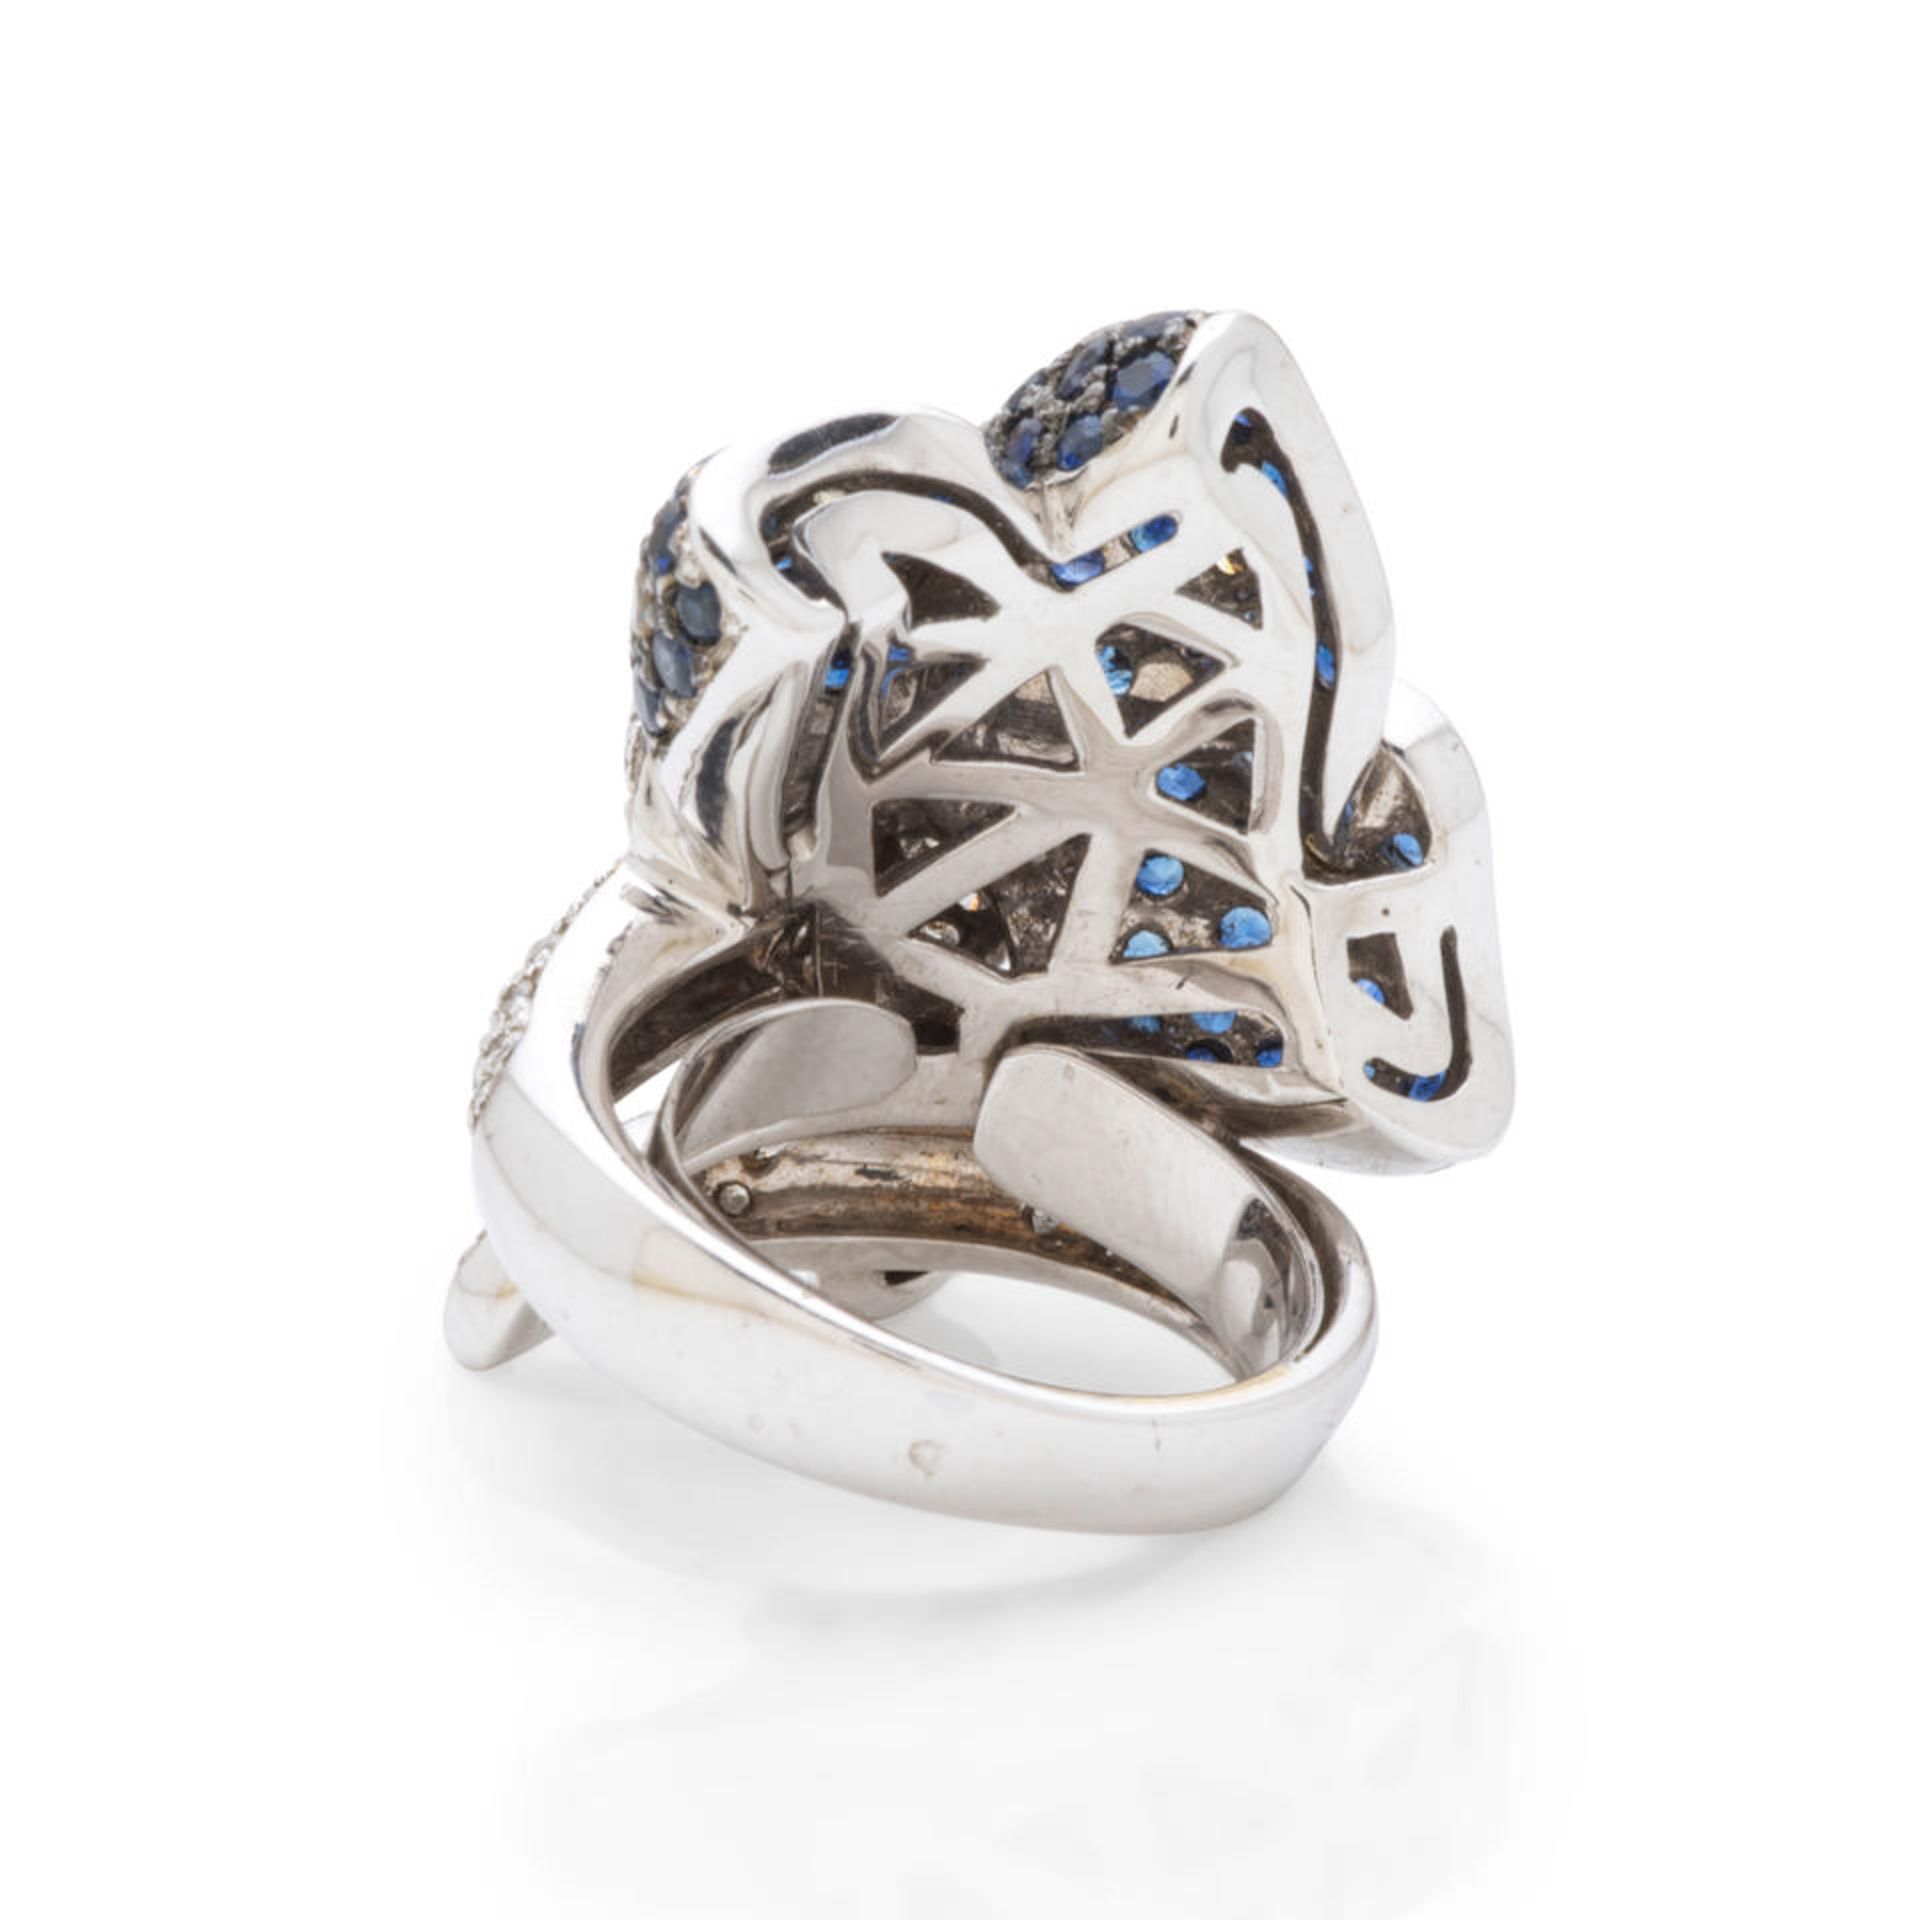 SAPPHIRE AND DIAMOND RING BAGUE SAPHIRS ET DIAMANTS - Image 2 of 3